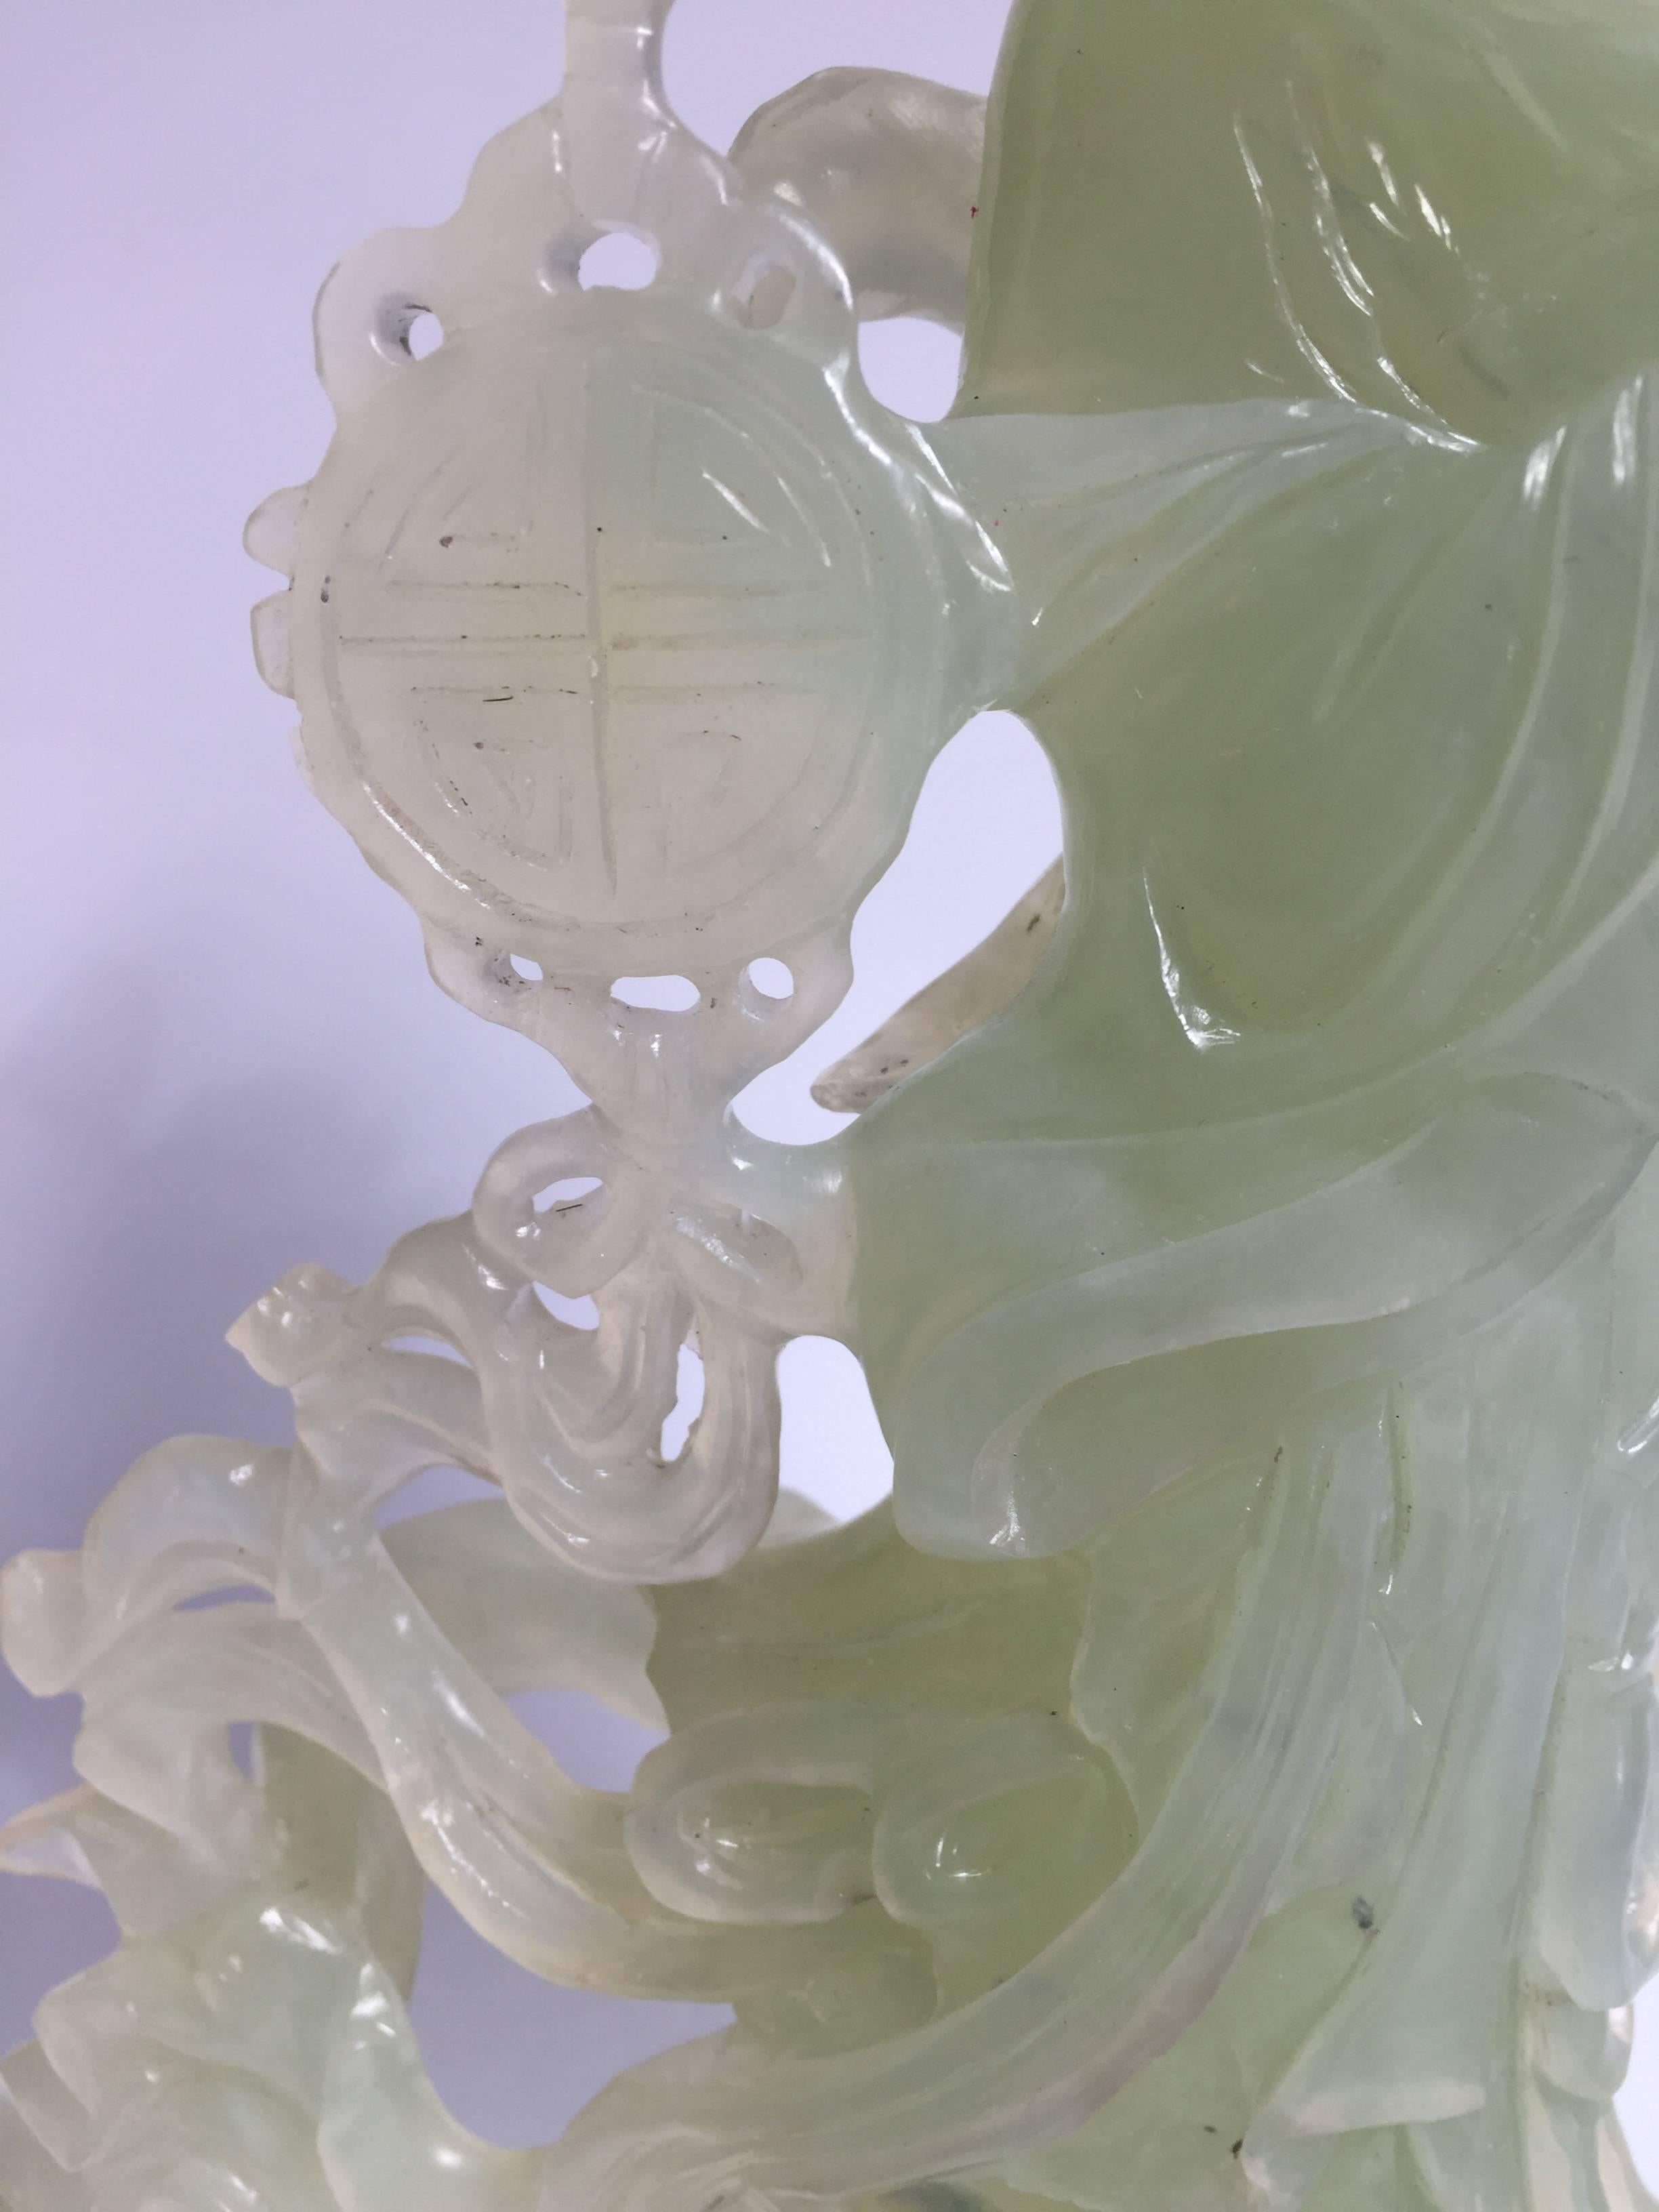 Absolutely beautiful statue of the Chinese moon fairy.

The statue is made of natural green Chinese Xiu Yu, which in China is regarded as jade. It is hand-carved by a master. Her facial features and fingers are finely done. Her robe and ribbons